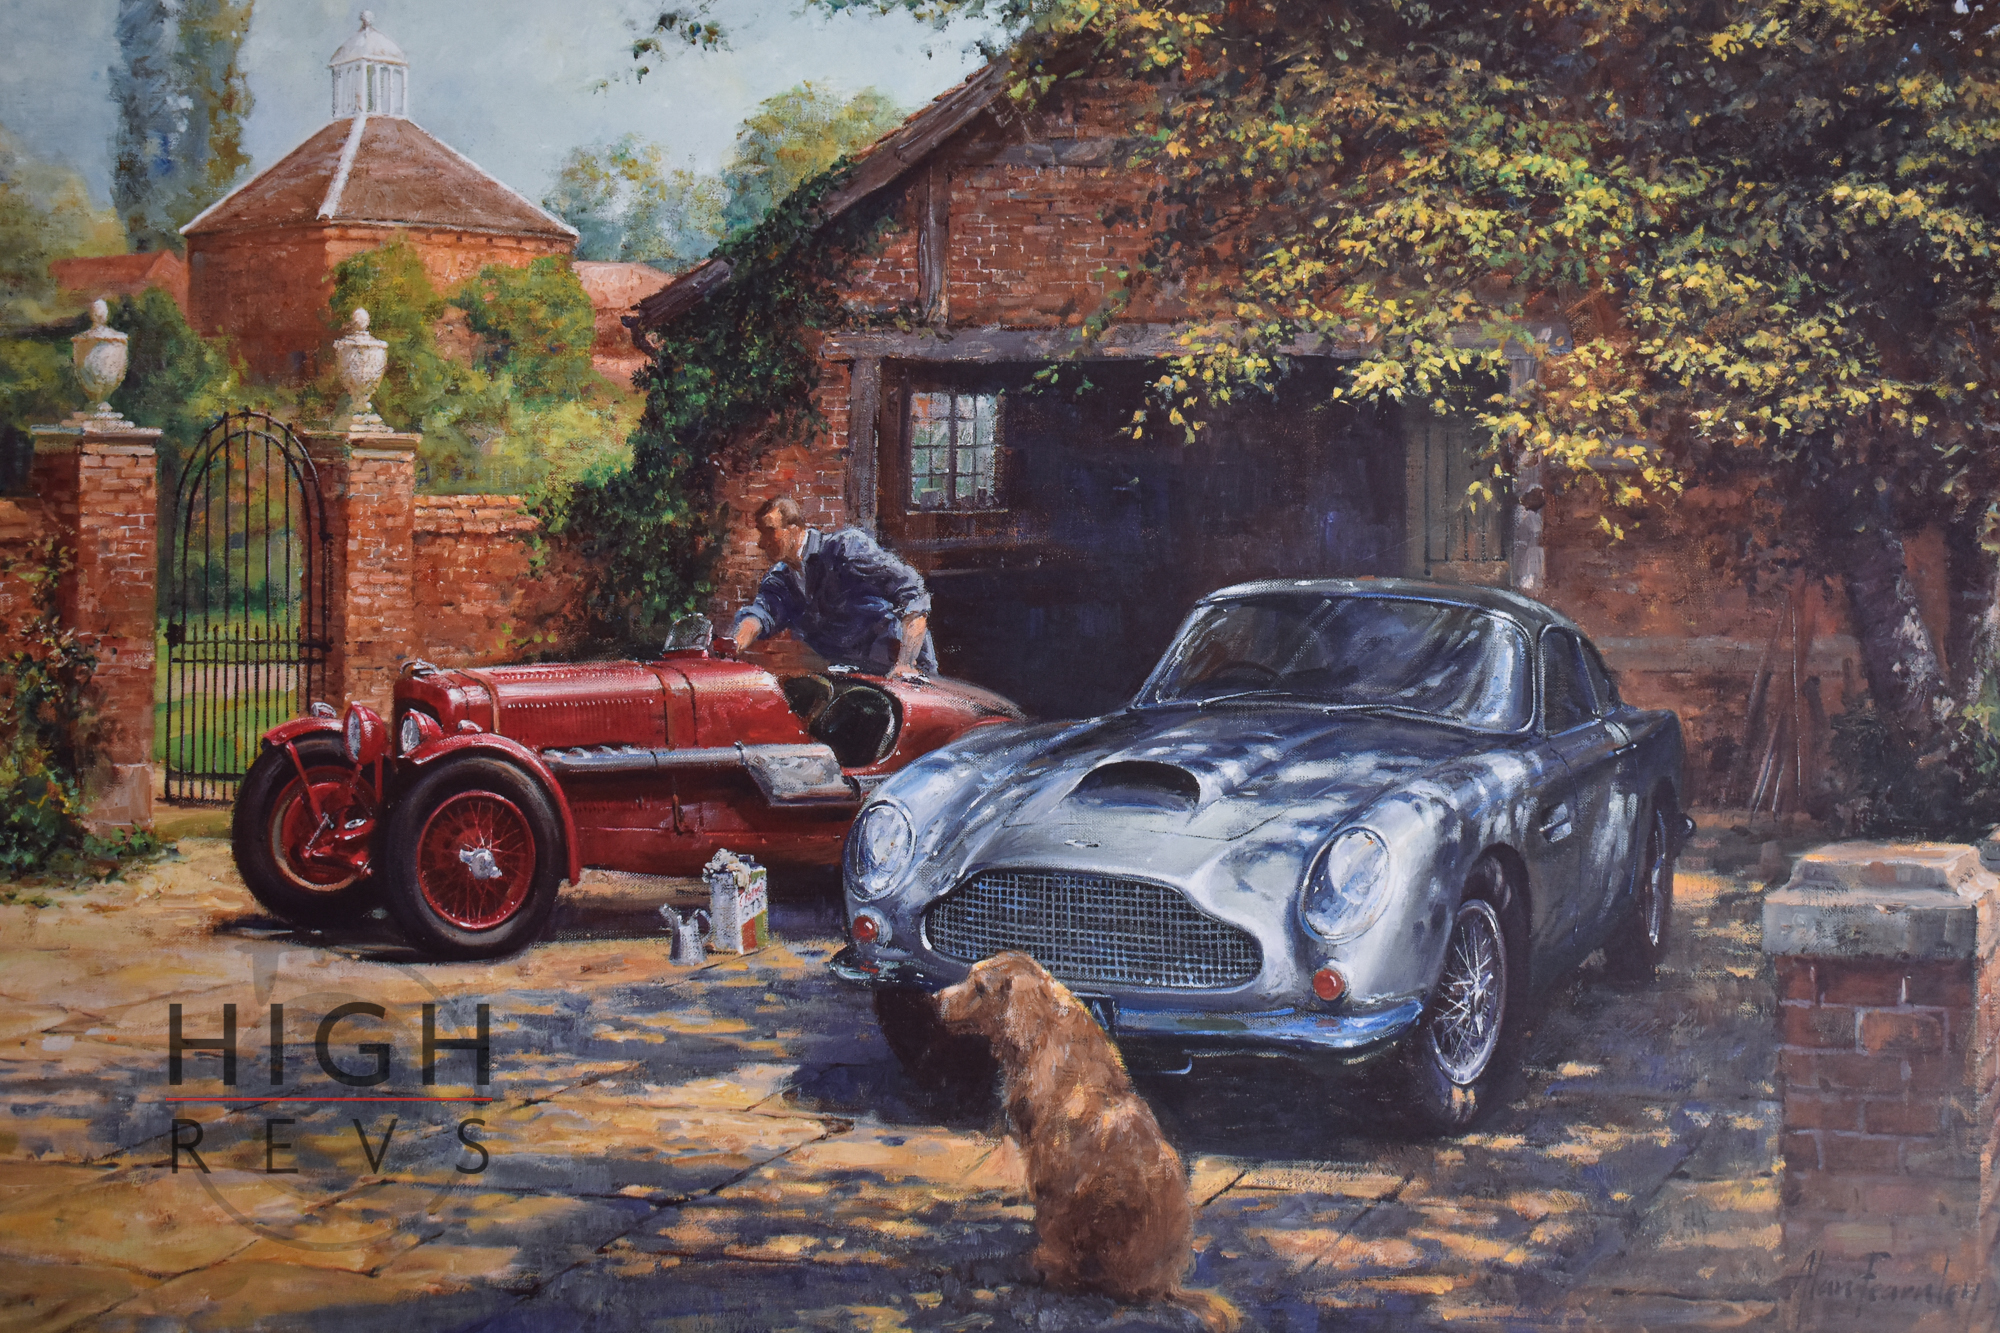 1934 Aston Martin Ulster 1500cc and a 1960 Aston Martin DB4 GT 3.7Ltr portrayed in an idyllic country house scene by leading automotive artist Alan Fearnley.